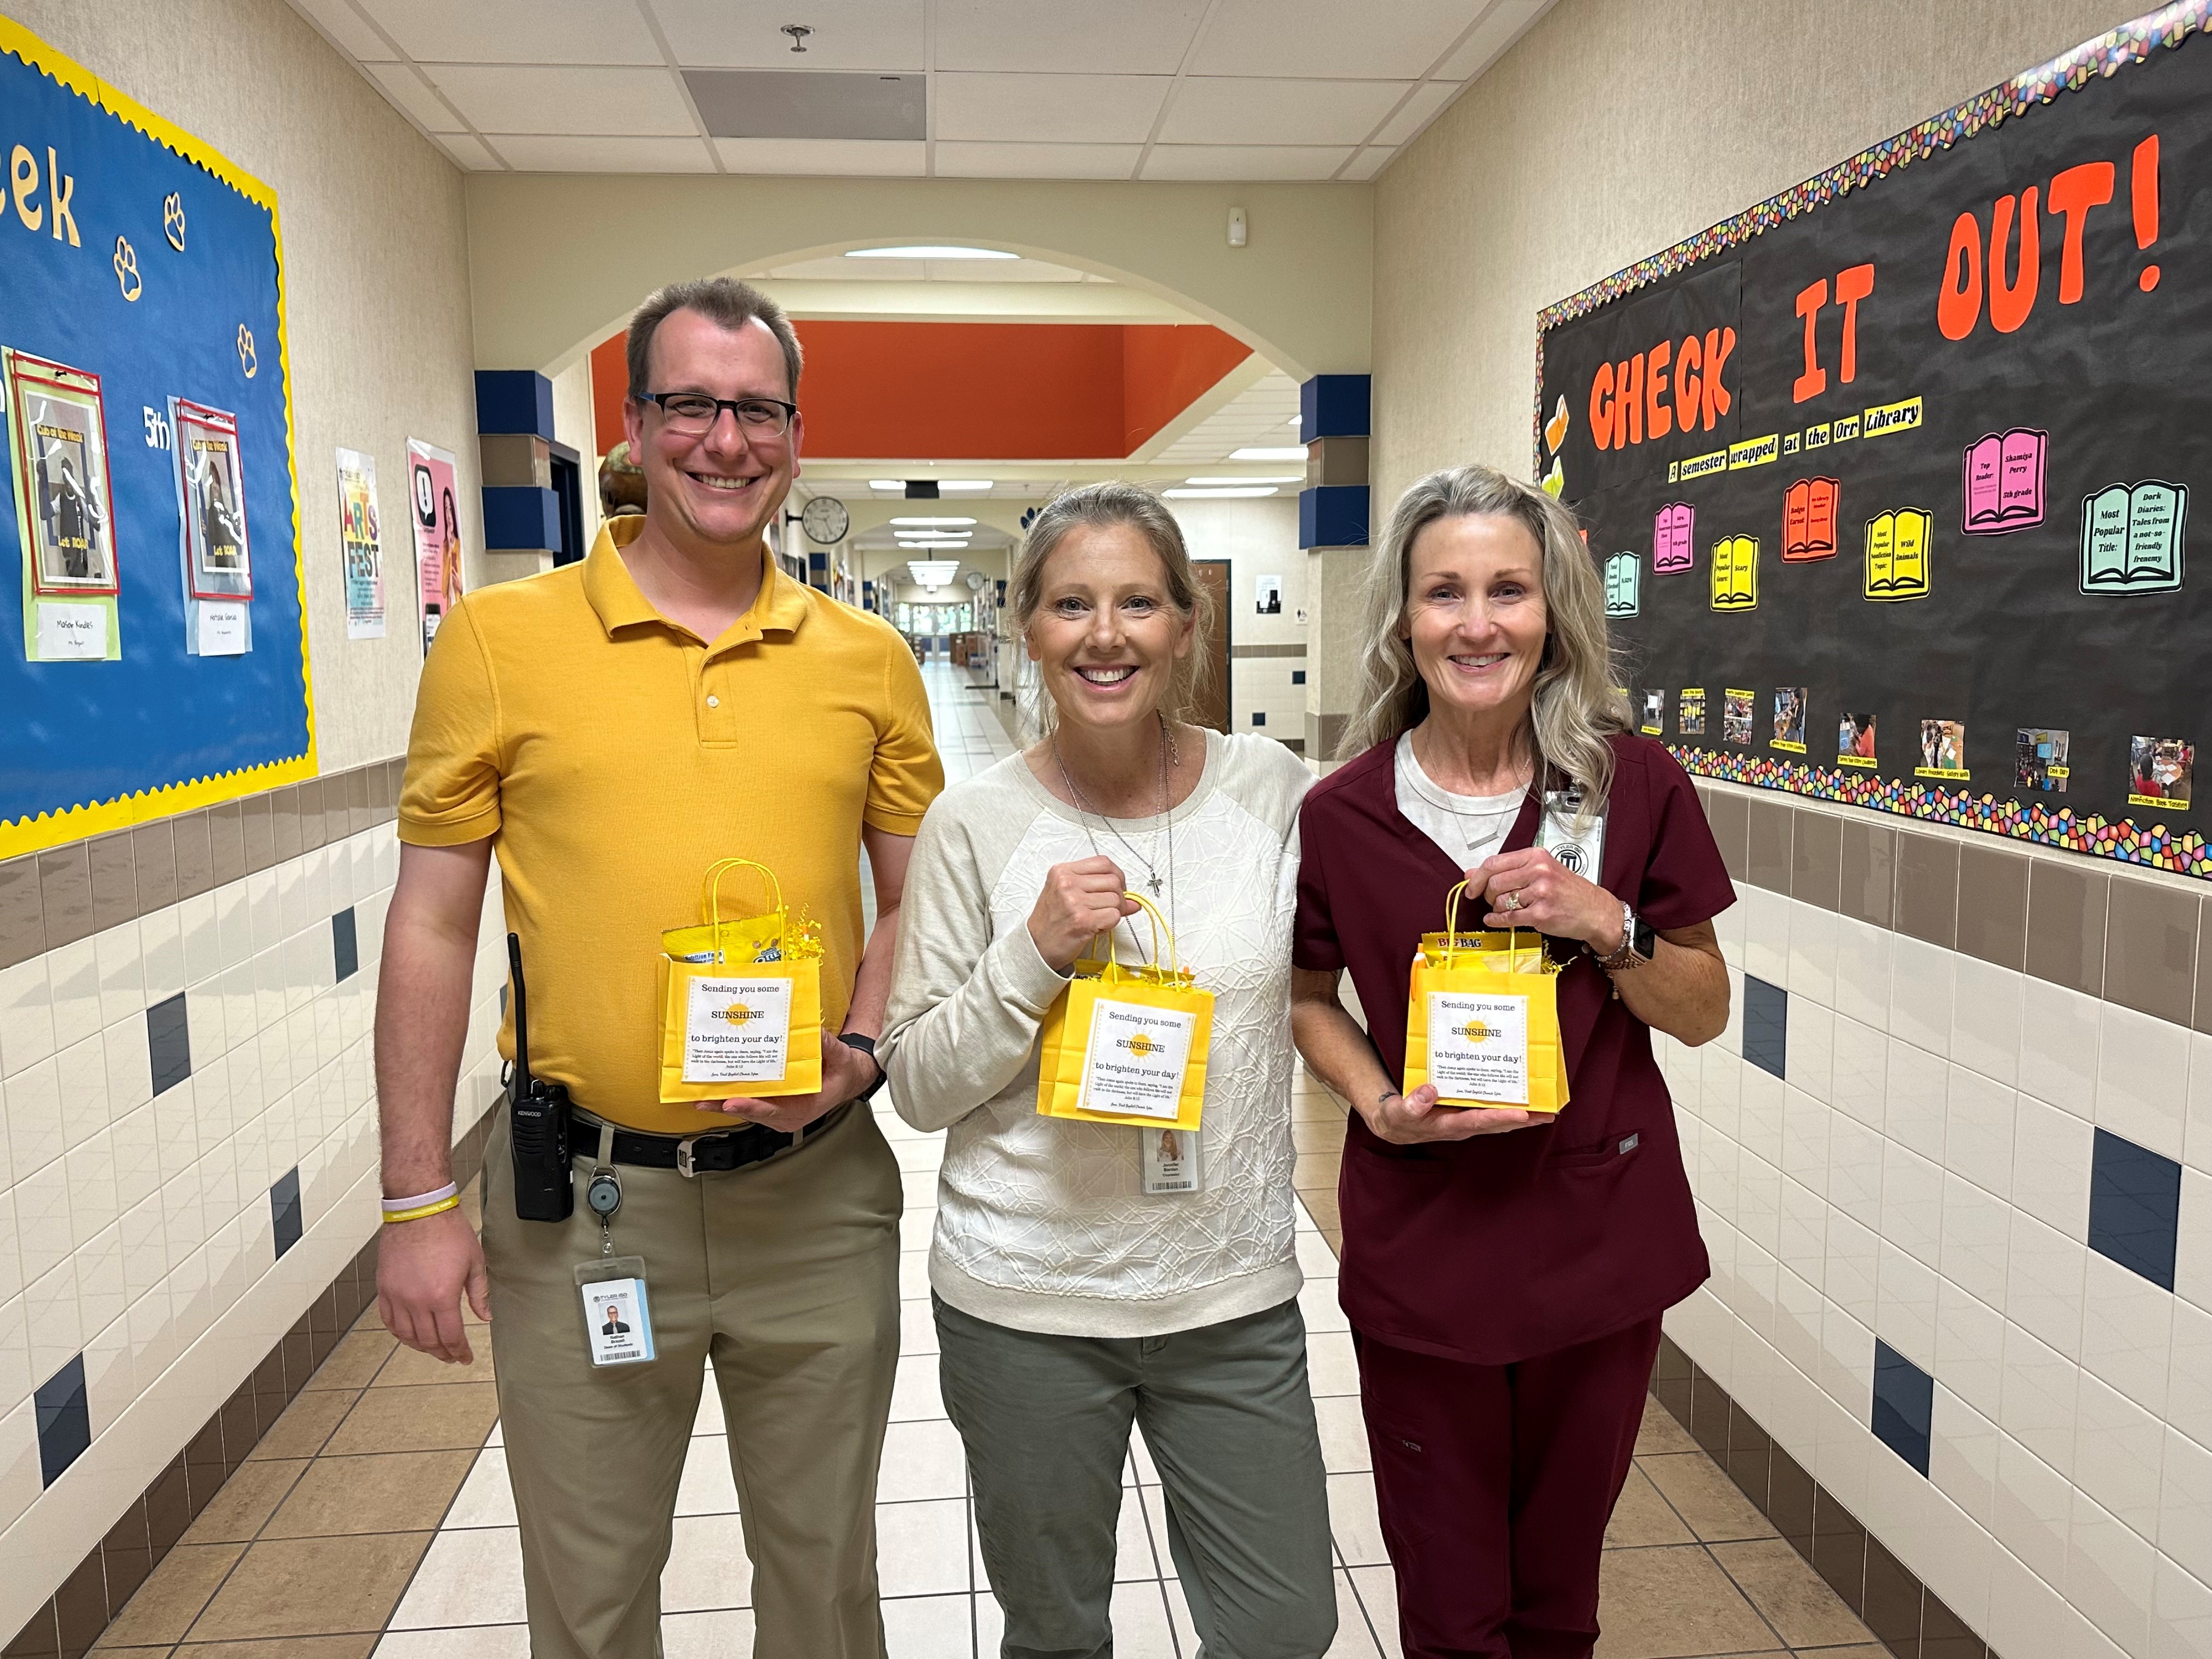 man and two women standing in a school cafeteria holding yellow gift bags